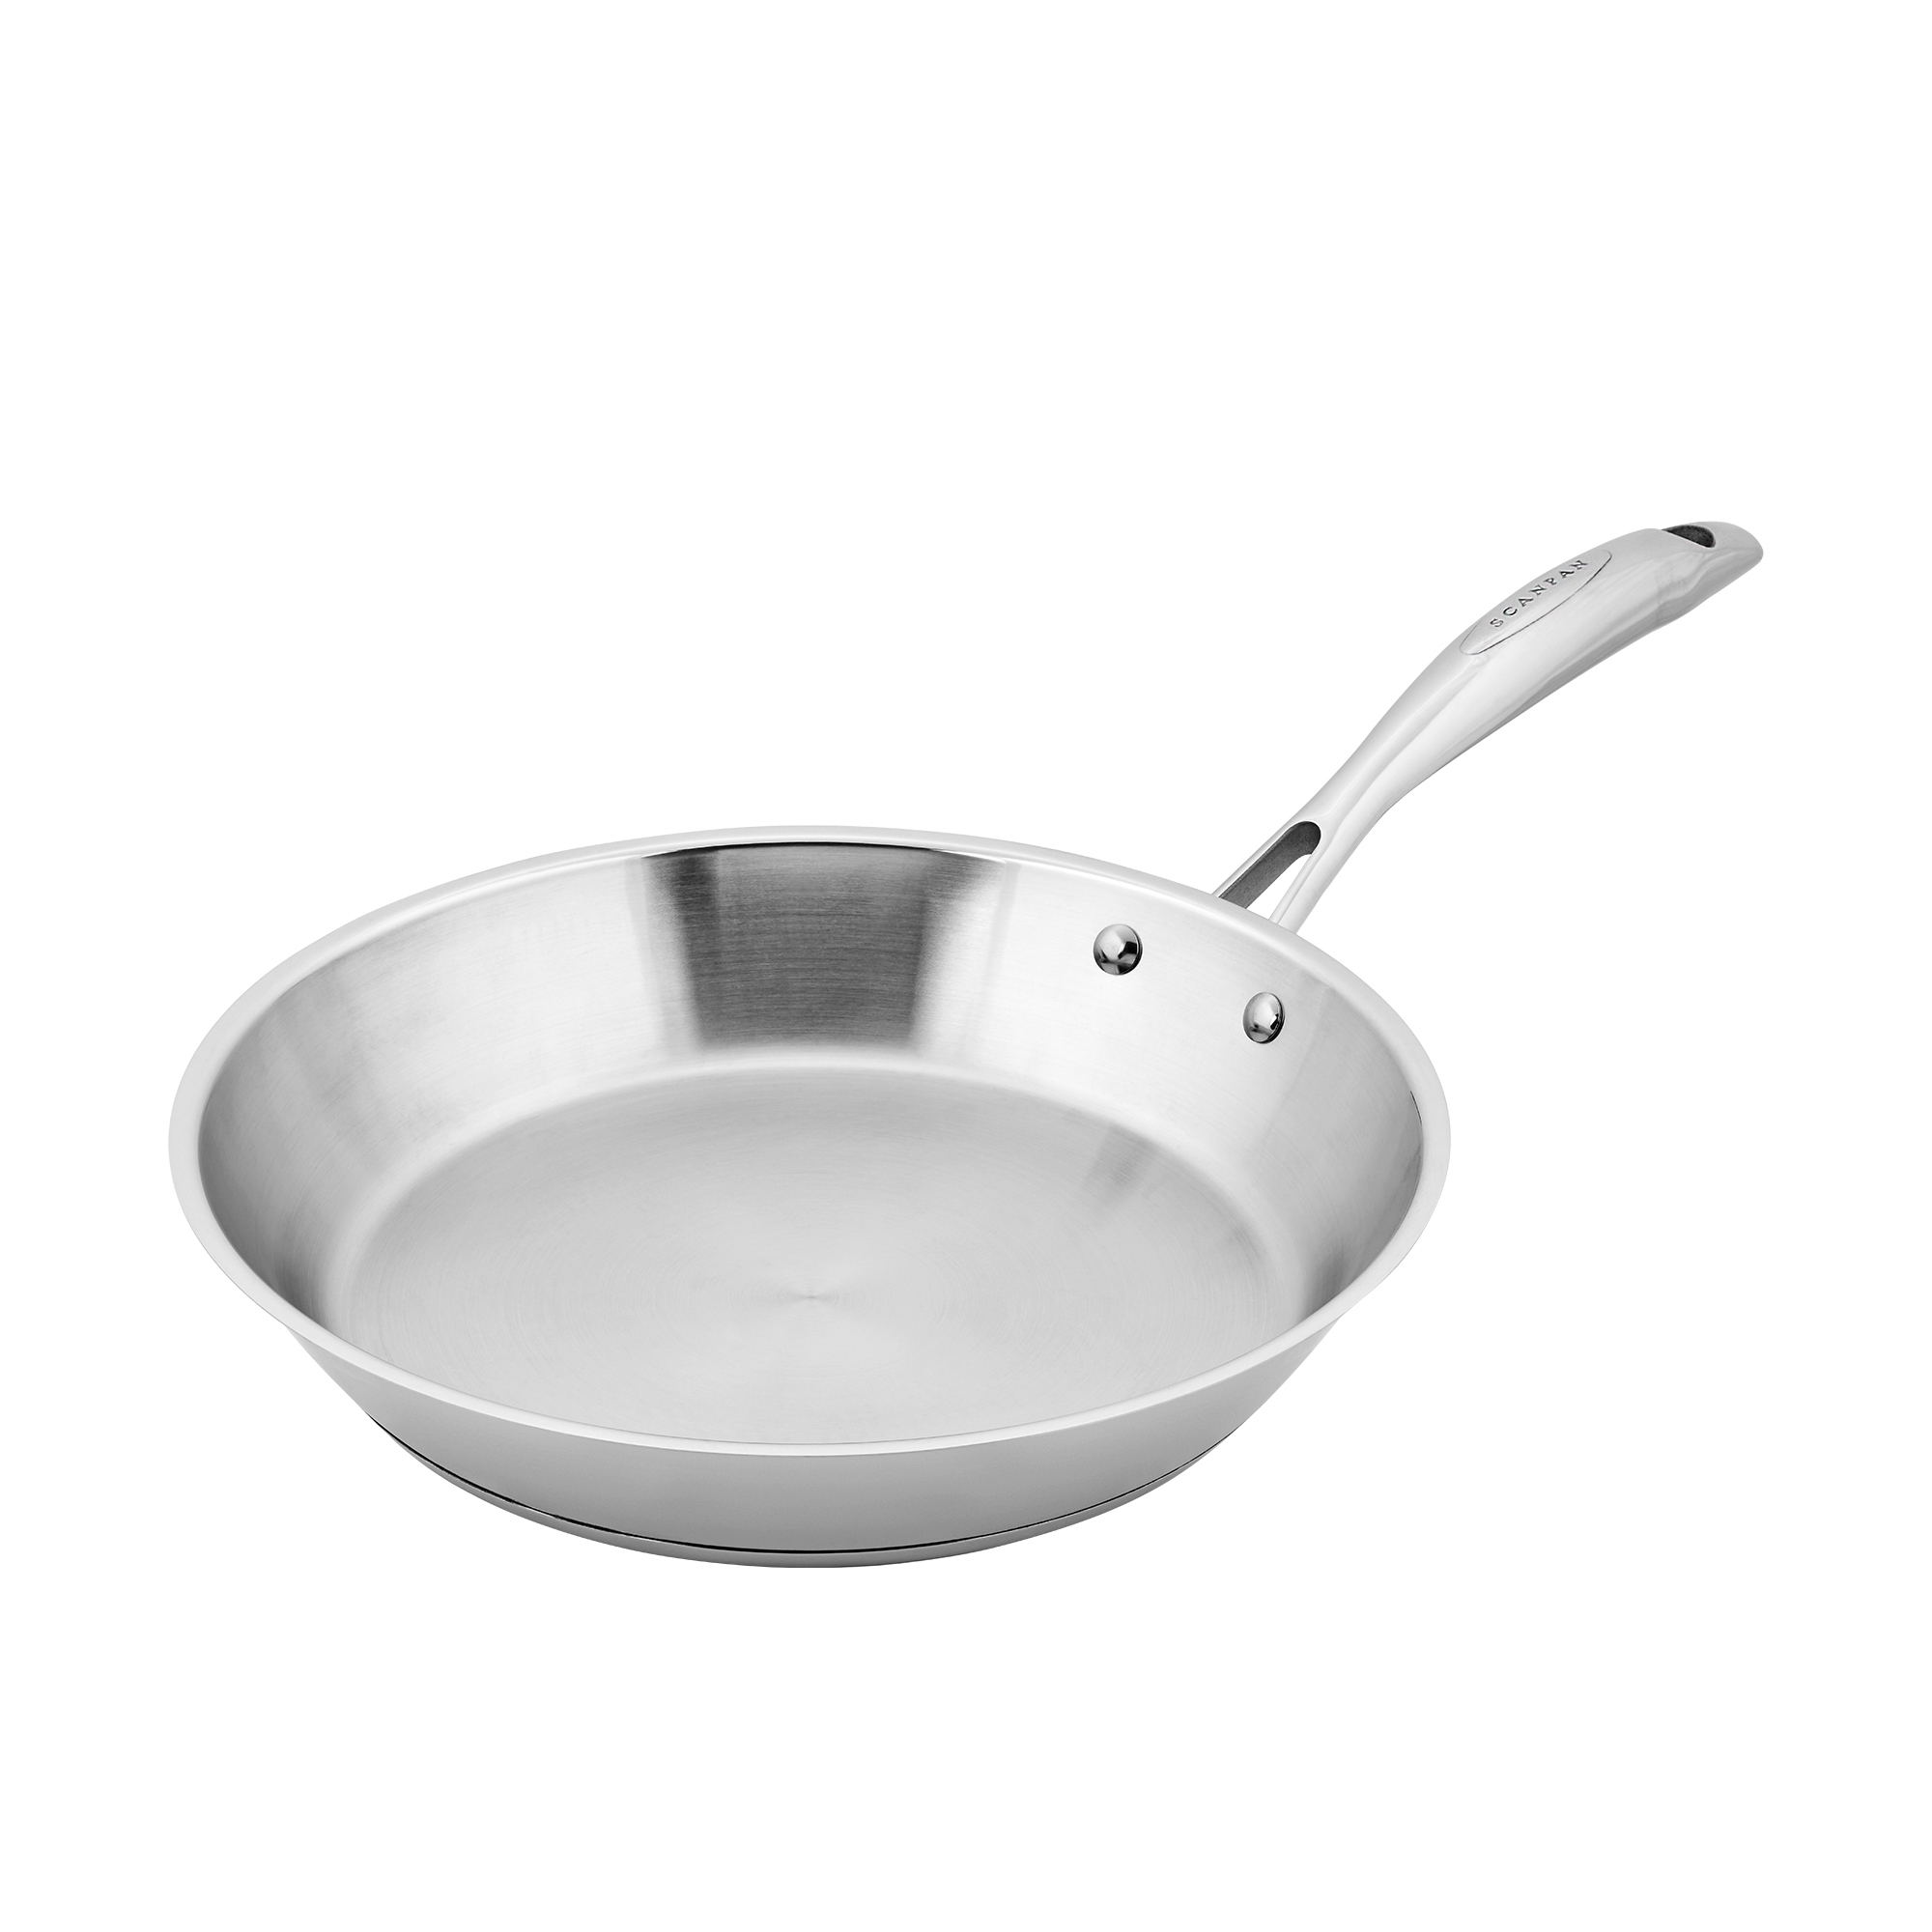 Scanpan STS Stainless Steel Frypan 28cm Image 1